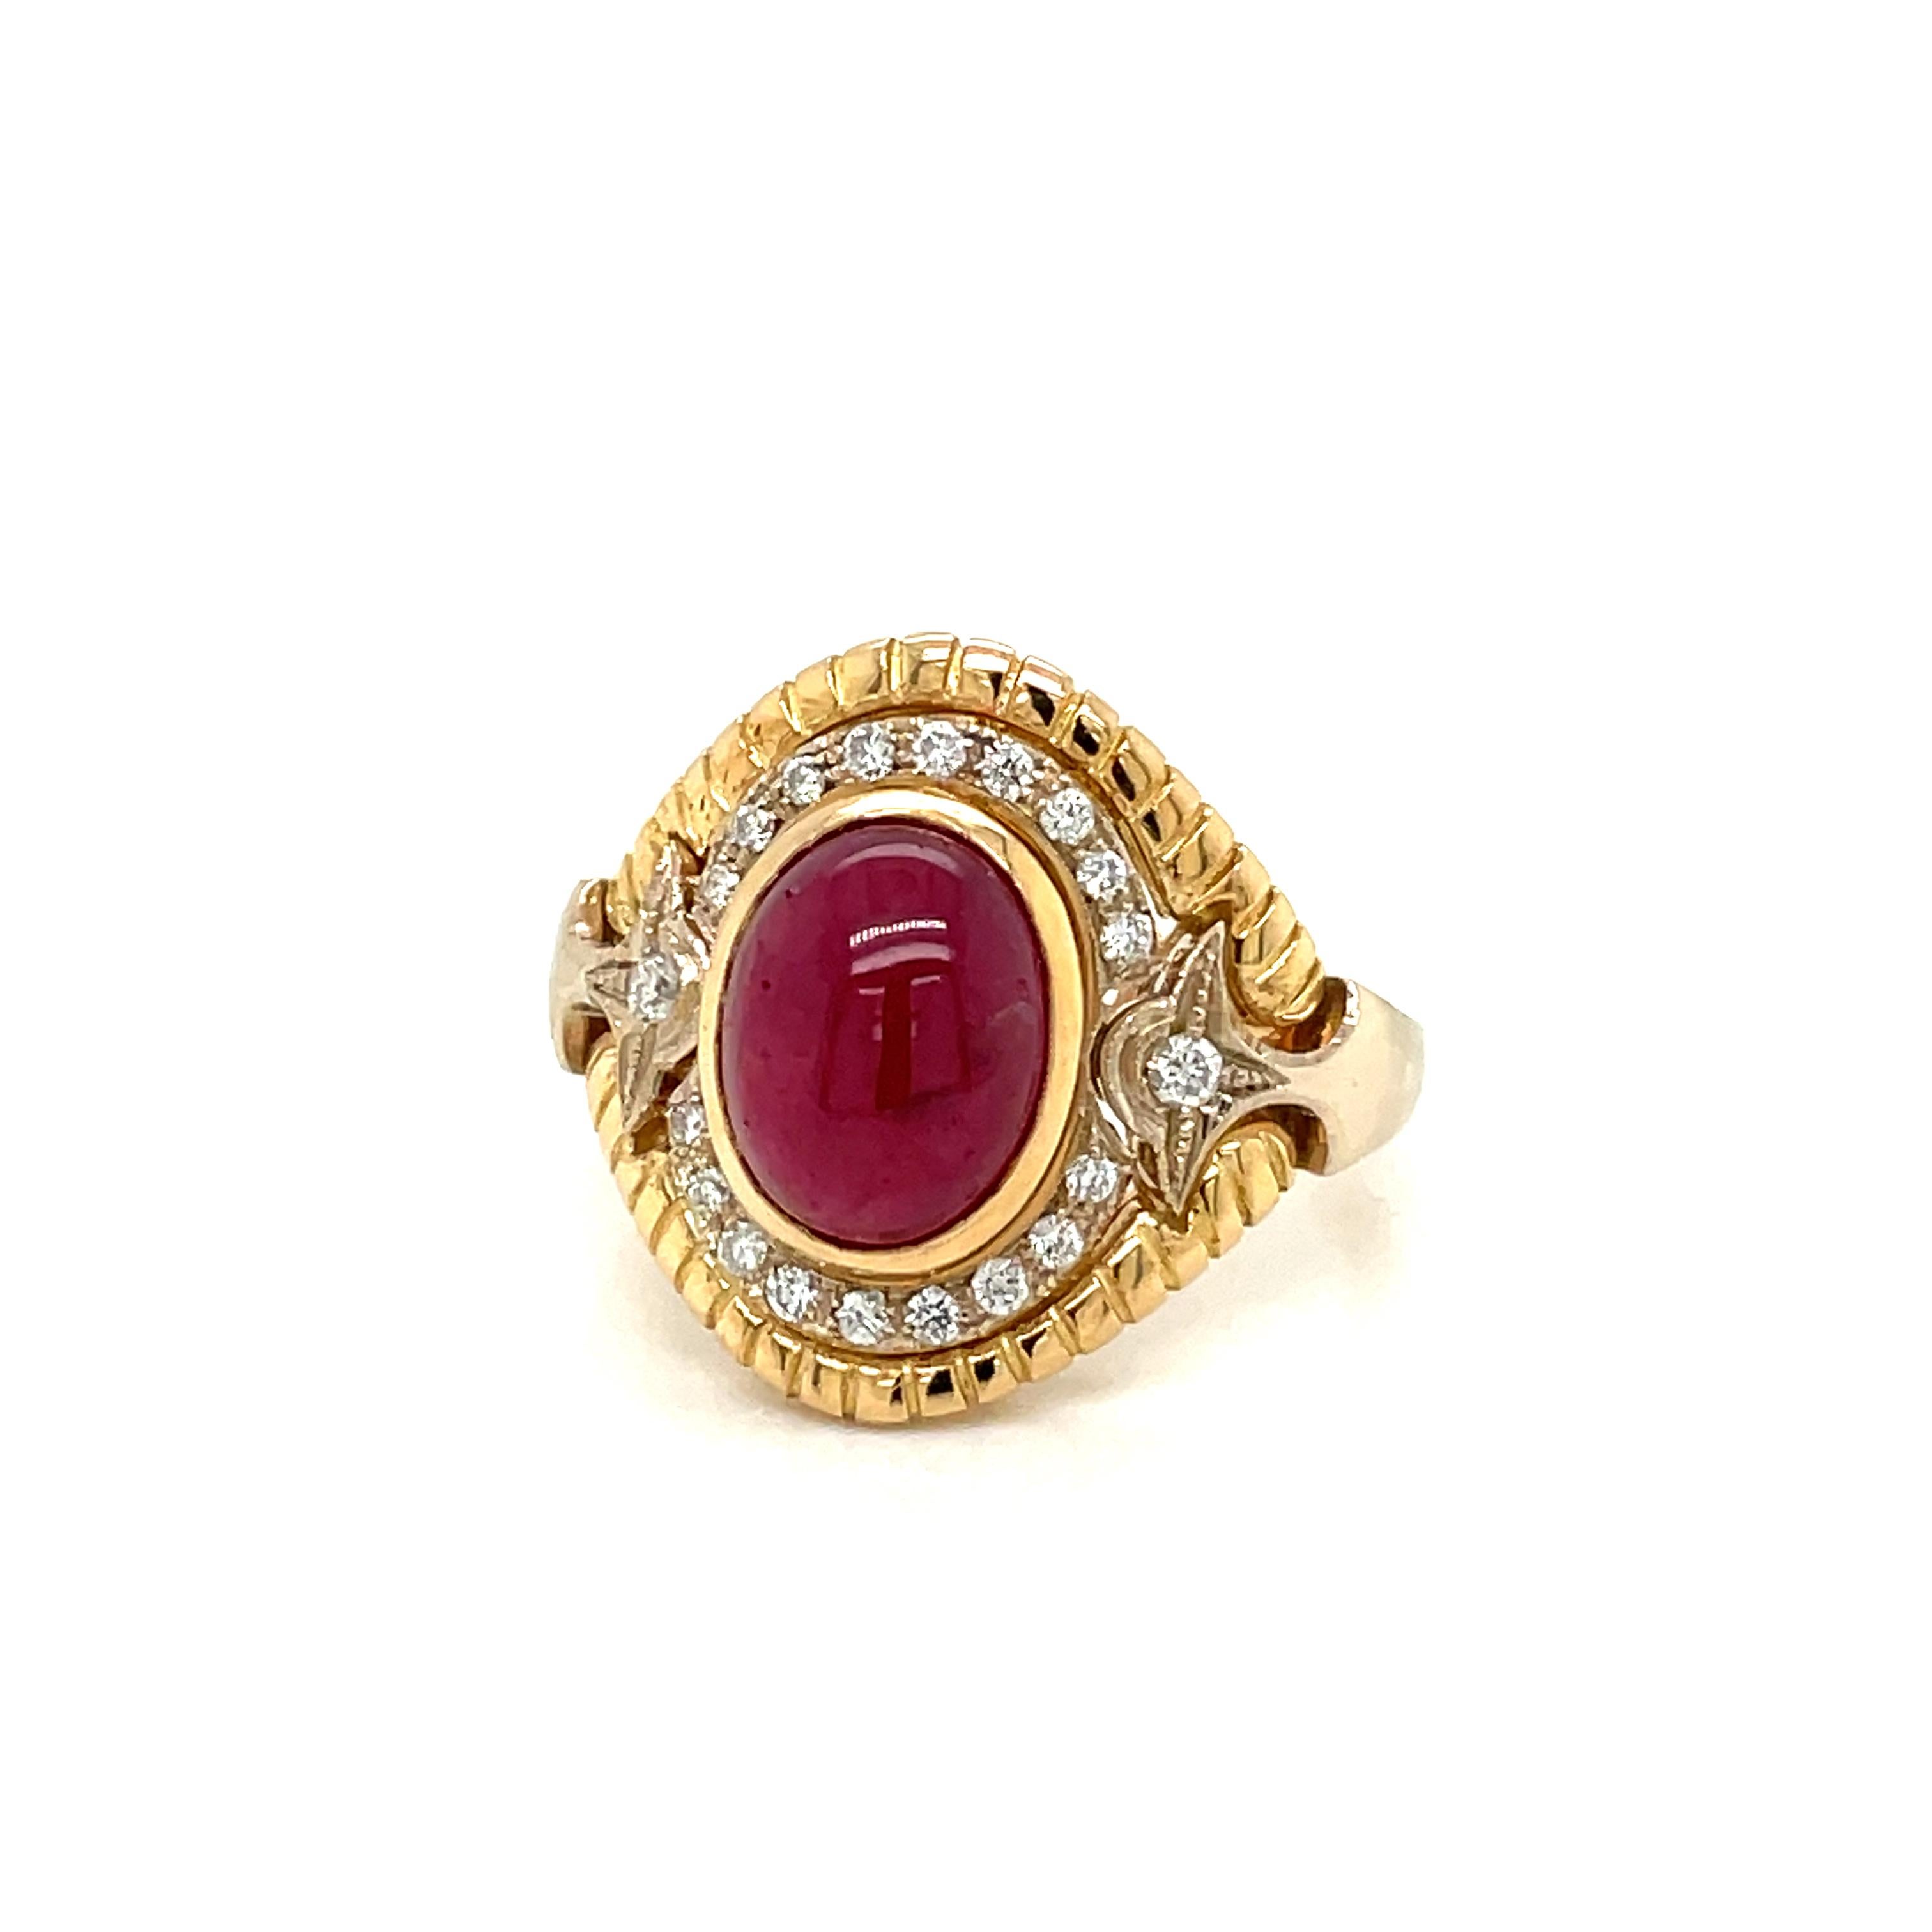 Retro 5 Carat Ruby Diamond Cocktail Ring For Sale 2